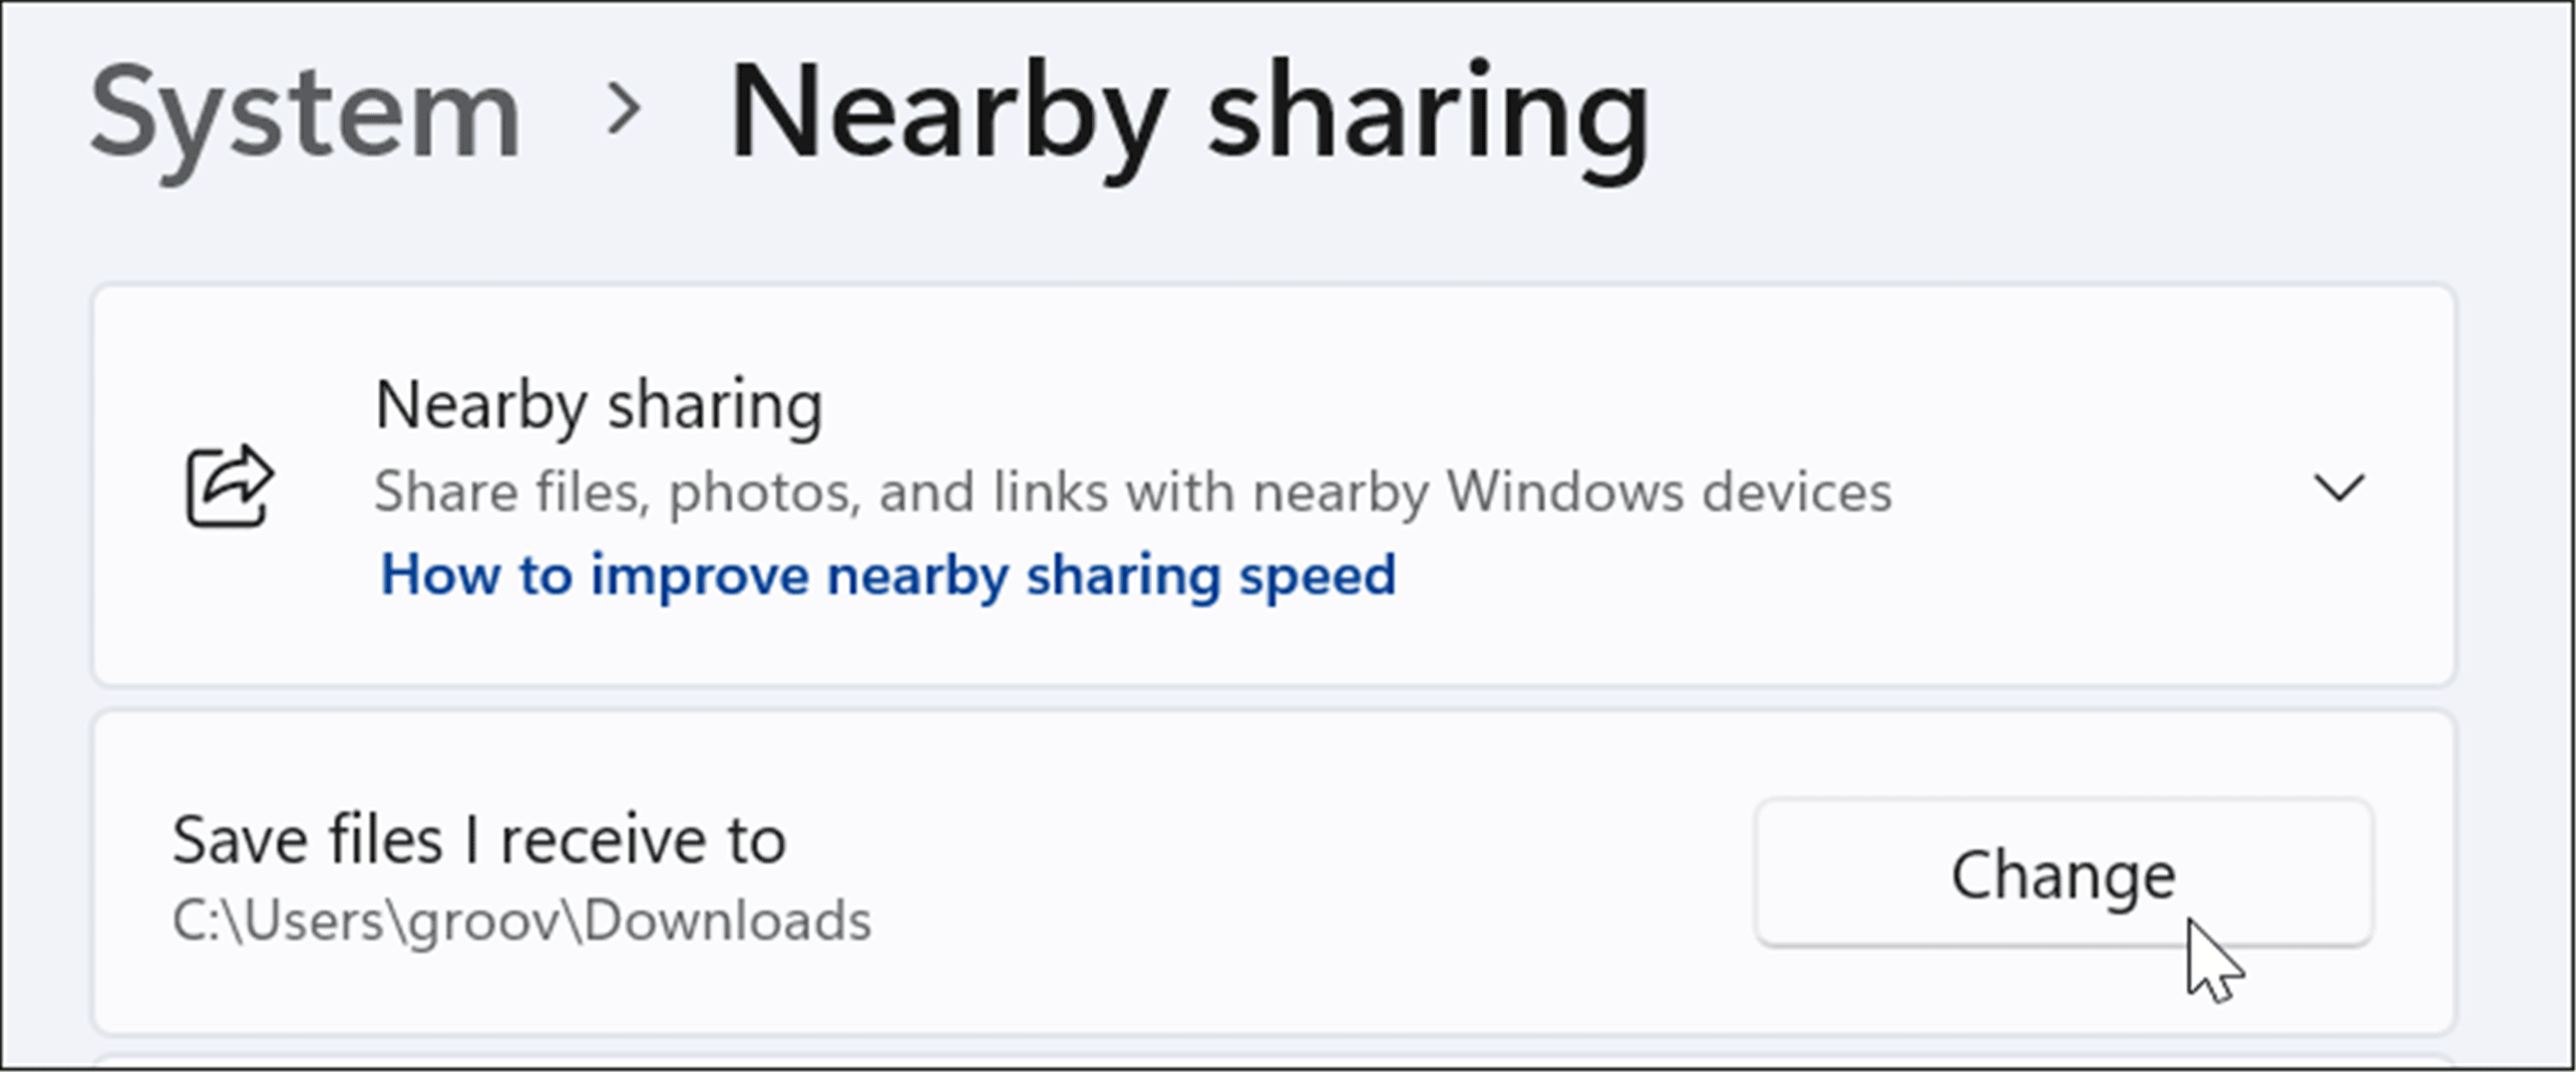 Change nearby sharing download location